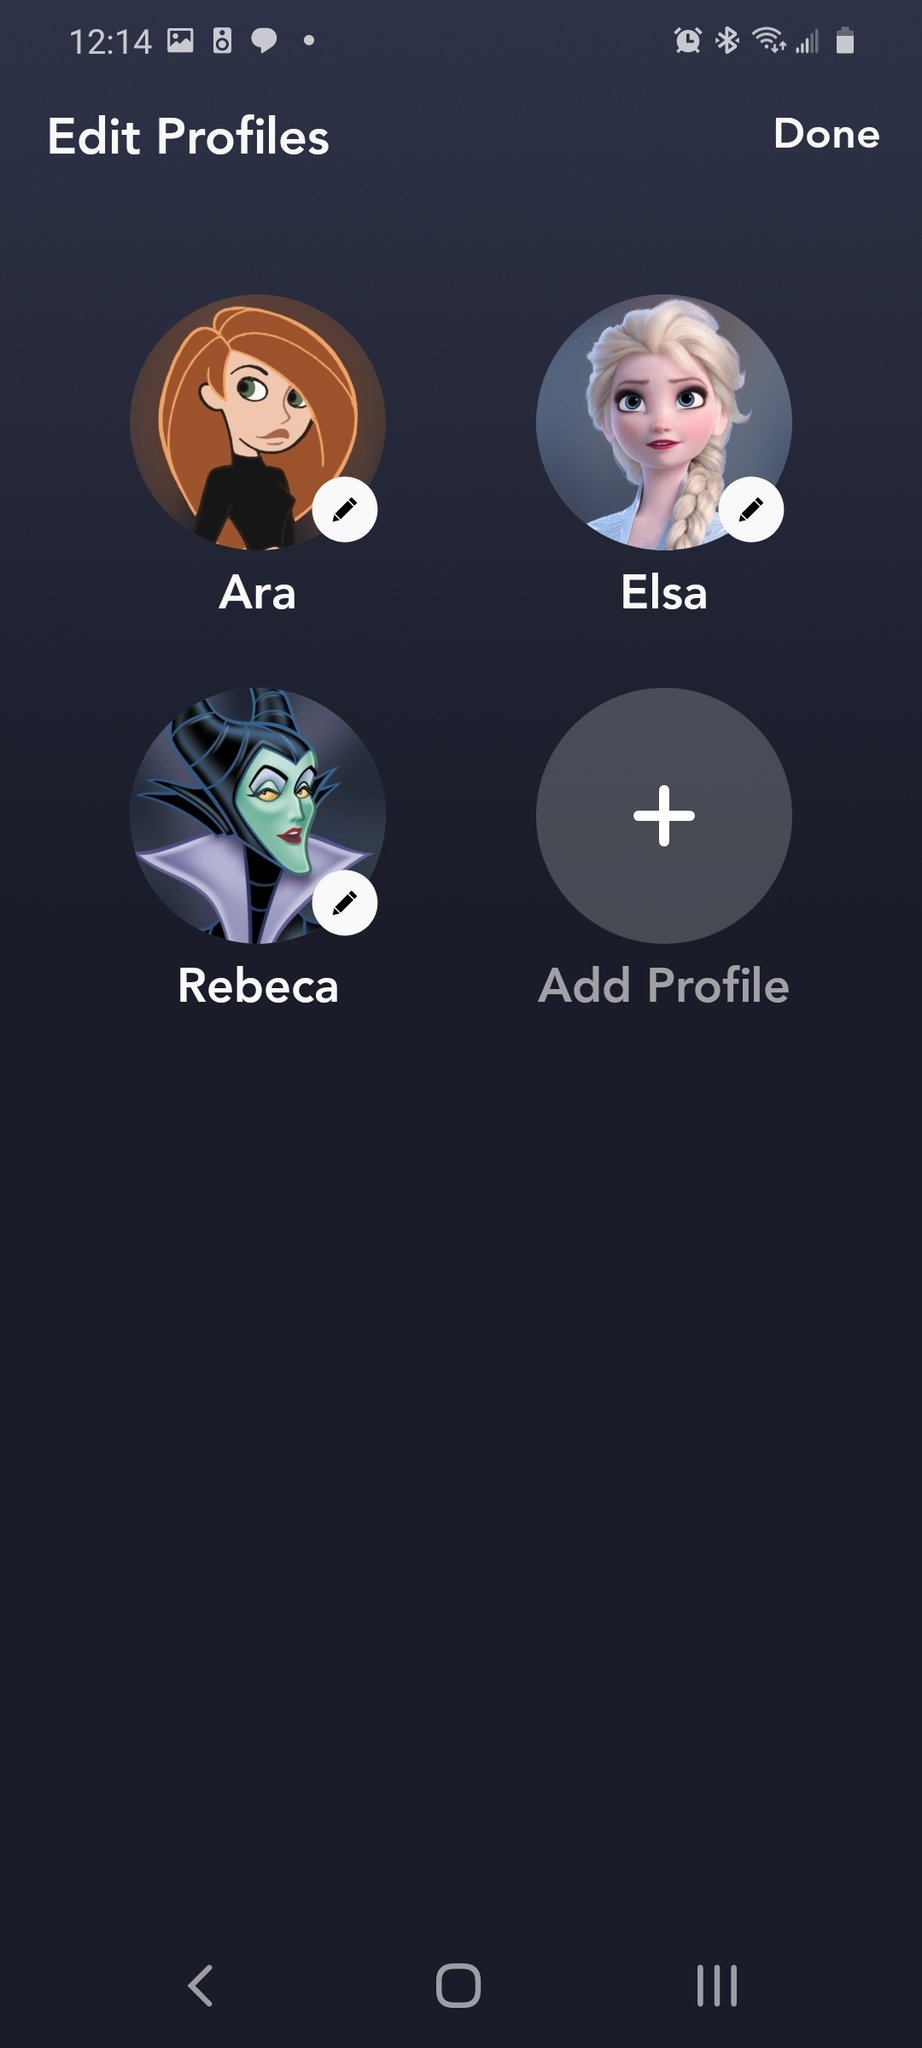 Tap the profile you want to edit